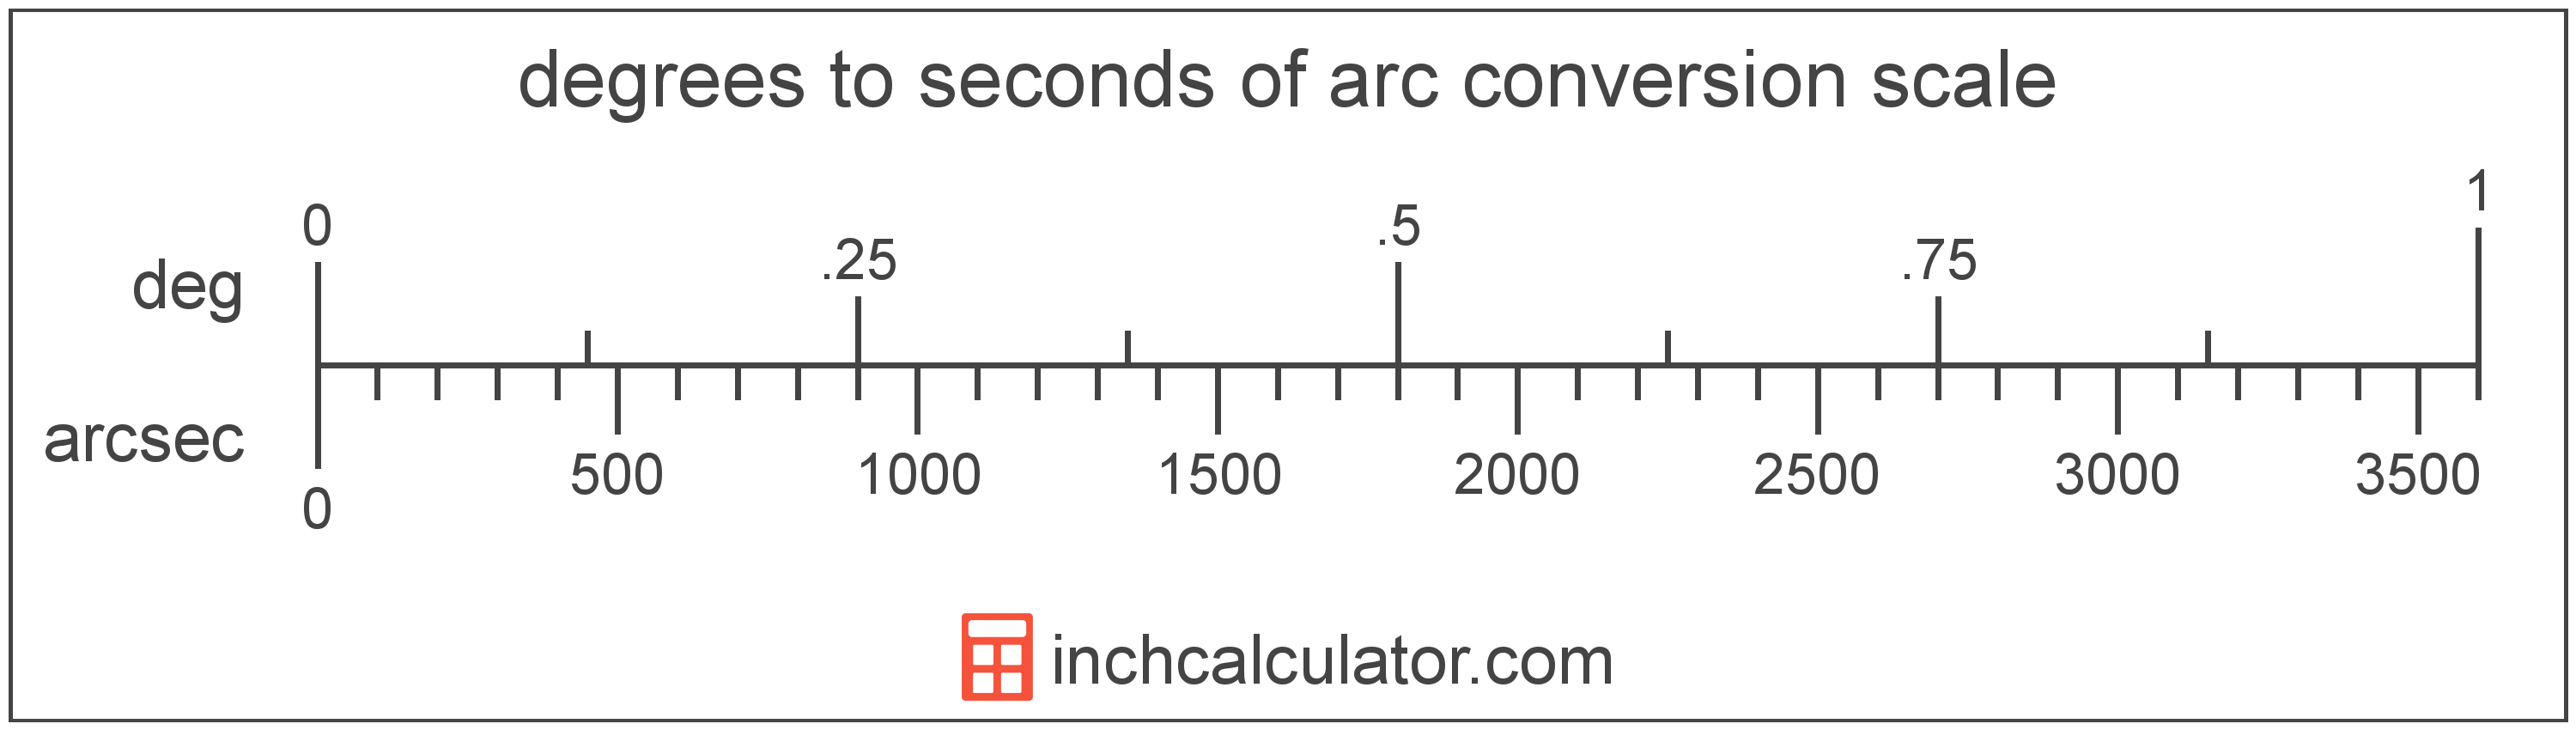 conversion scale showing degrees and equivalent seconds of arc angle values